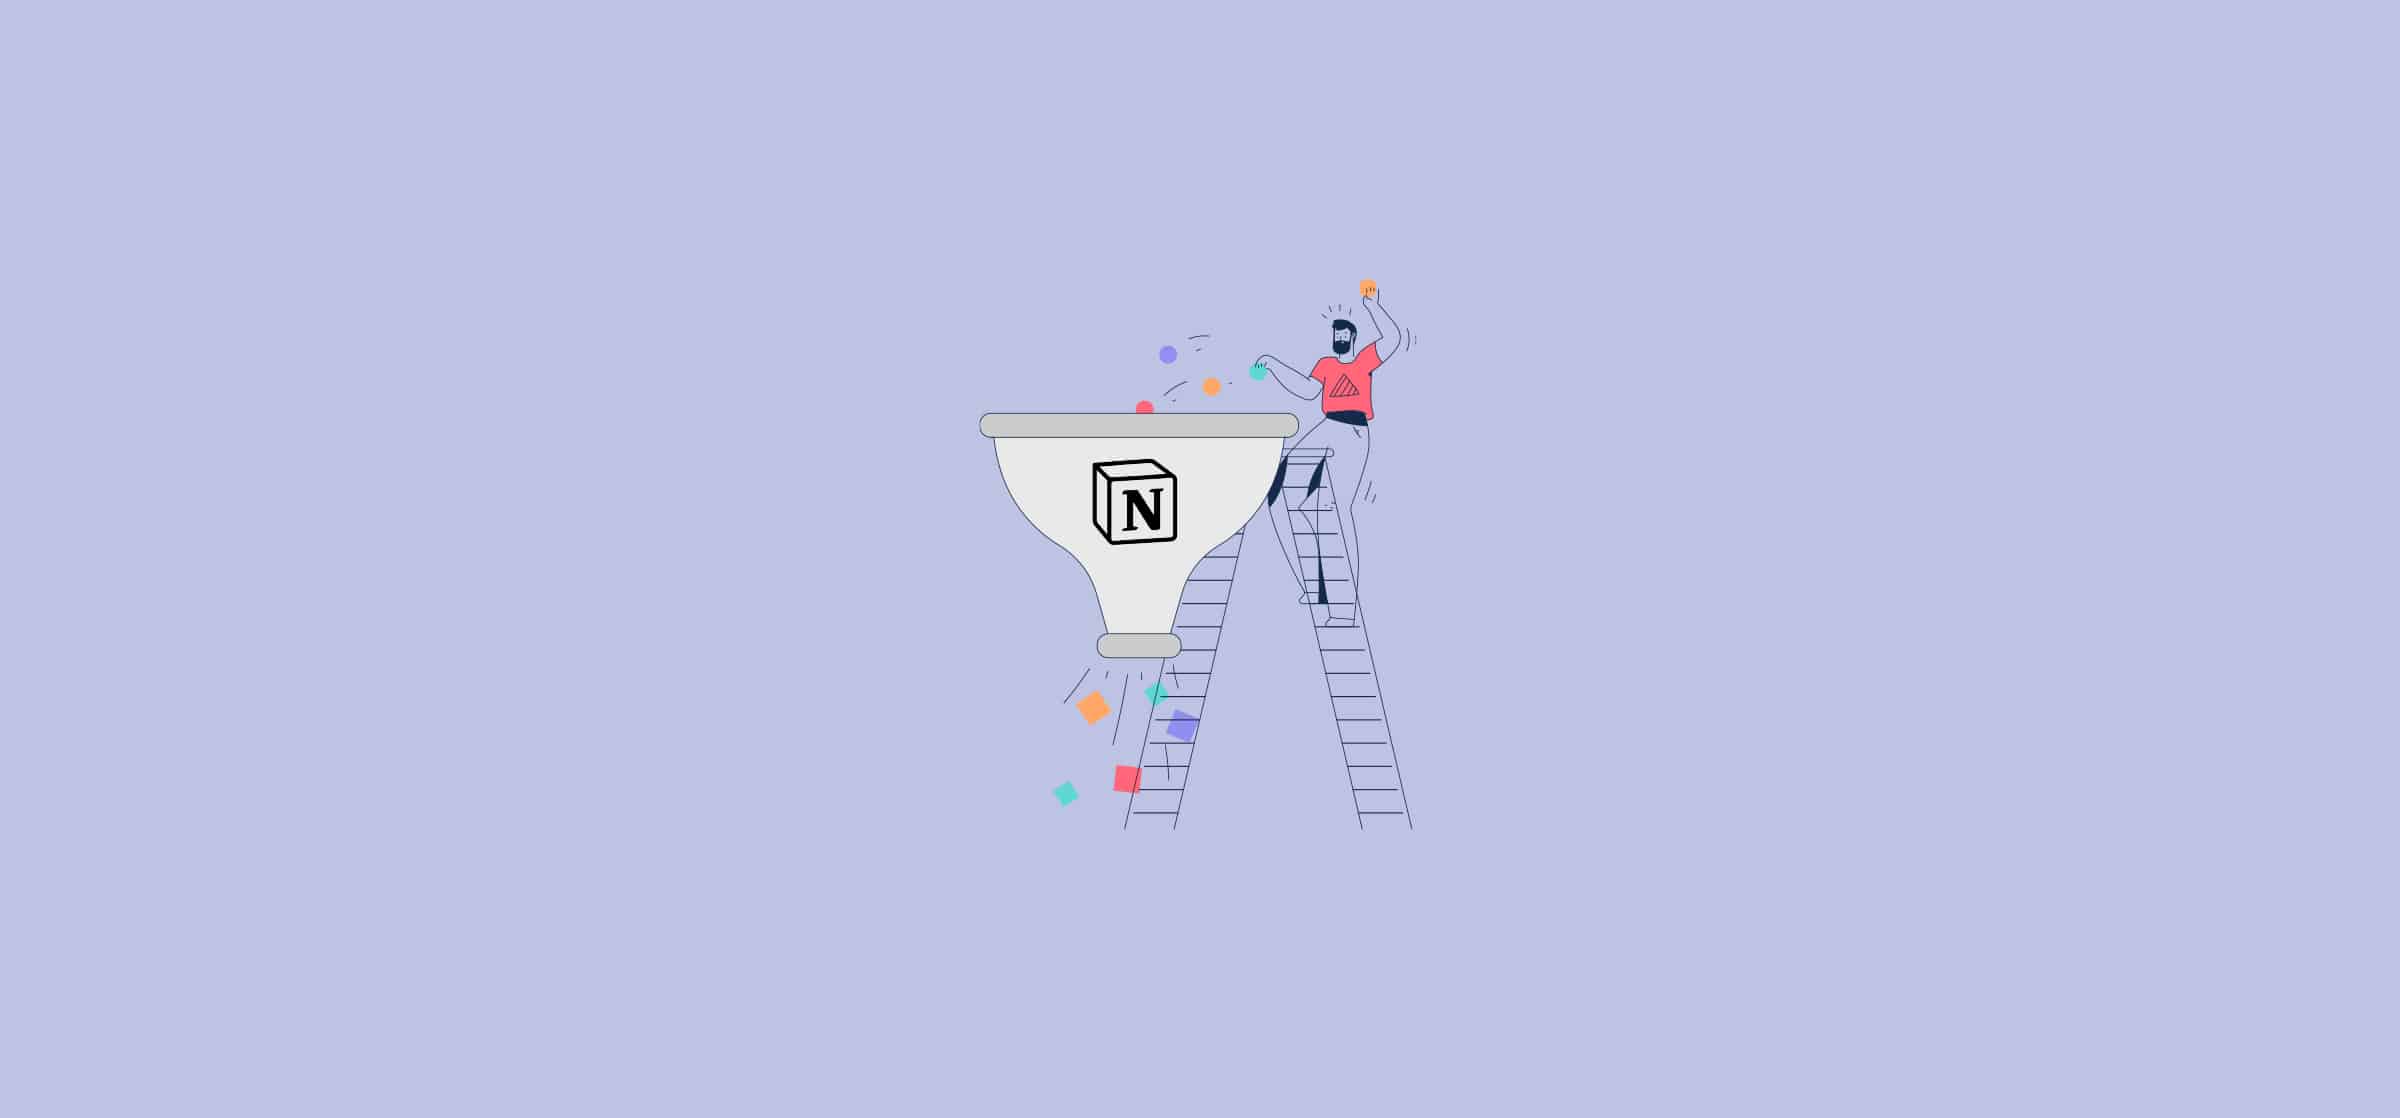 A person dropping balls into a funnel, representing the Notion CRM blog post.